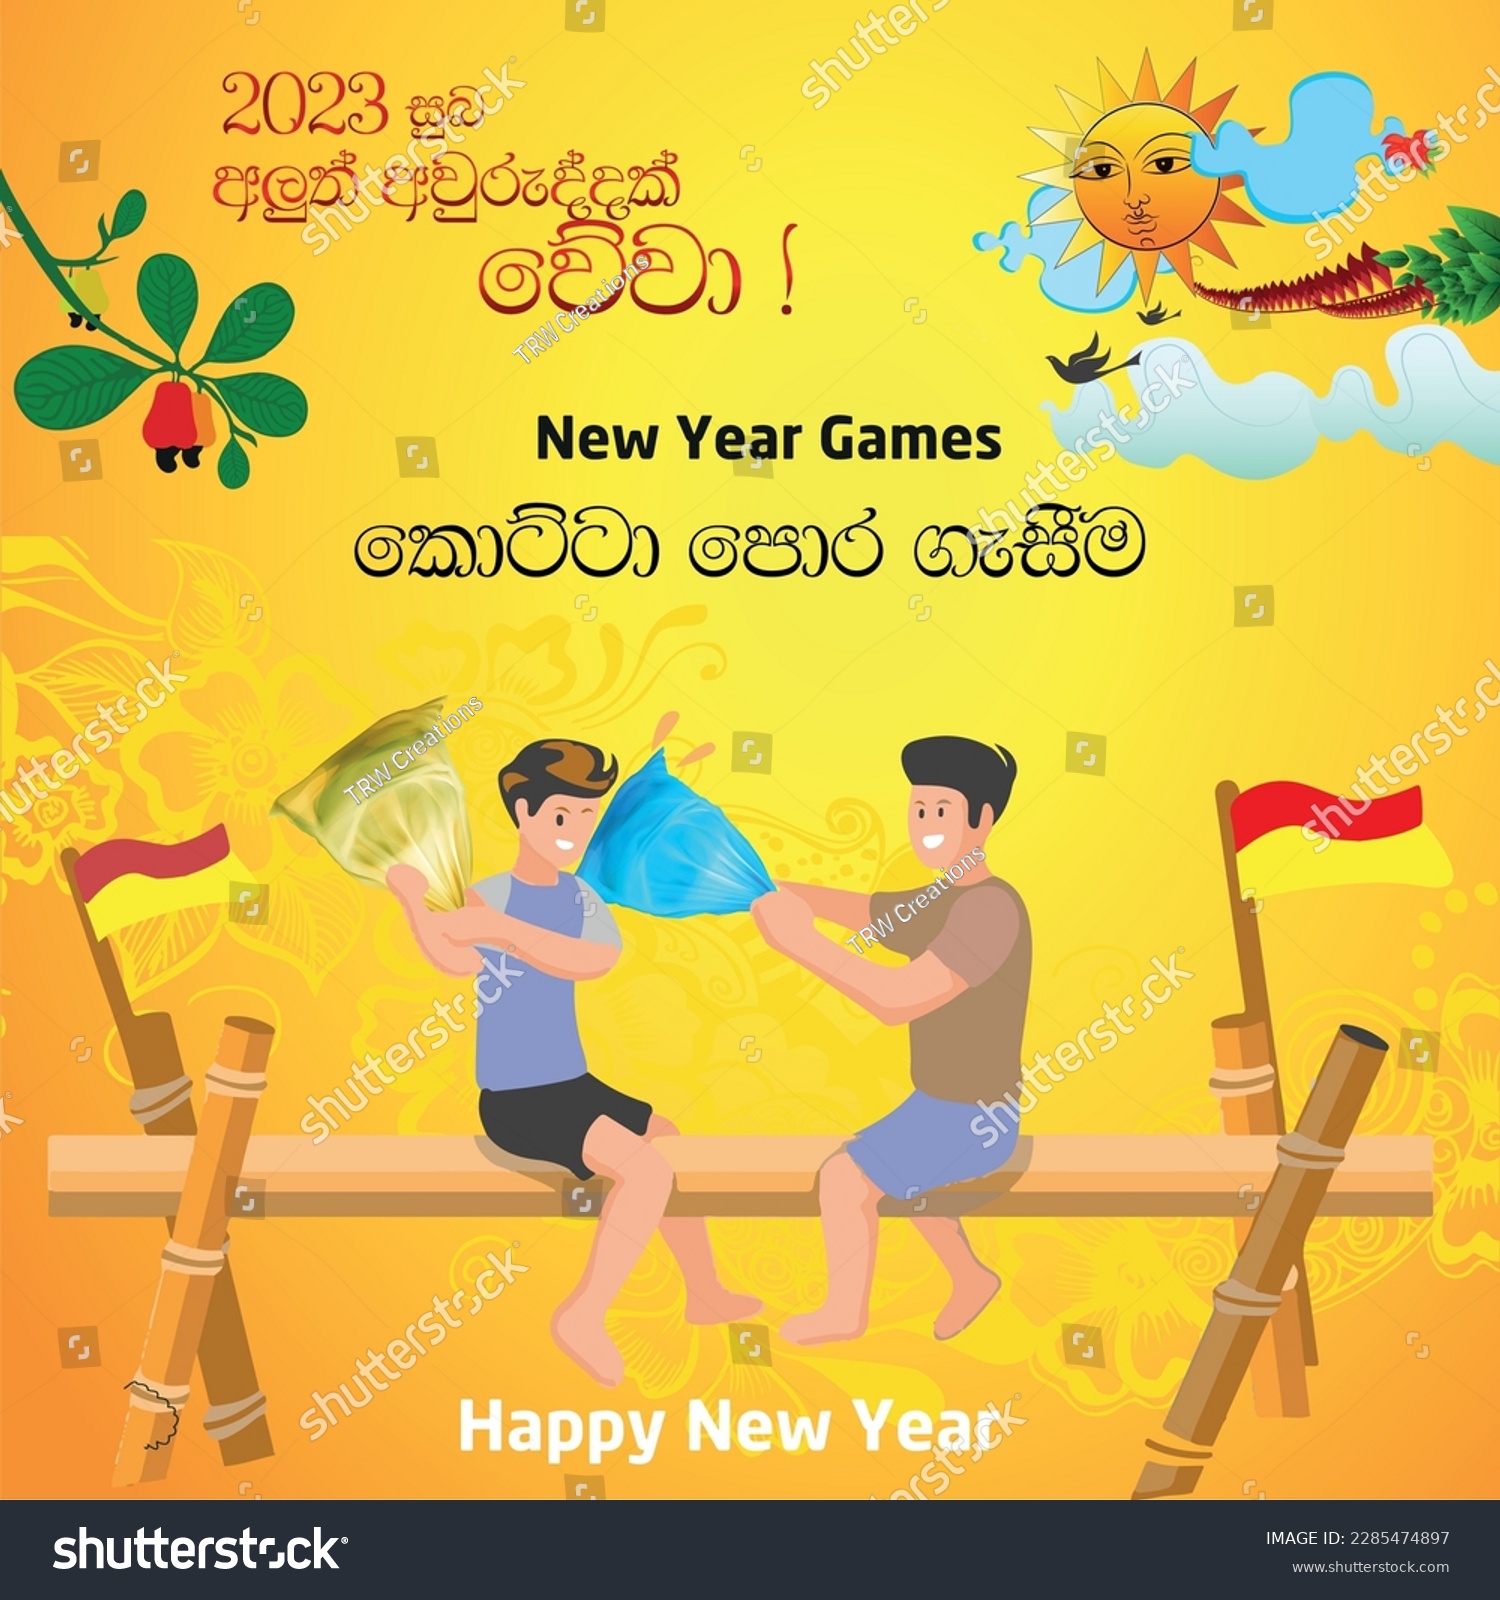 The Dawn Of The Sinhala And Tamil New Year Royalty Free Stock Vector